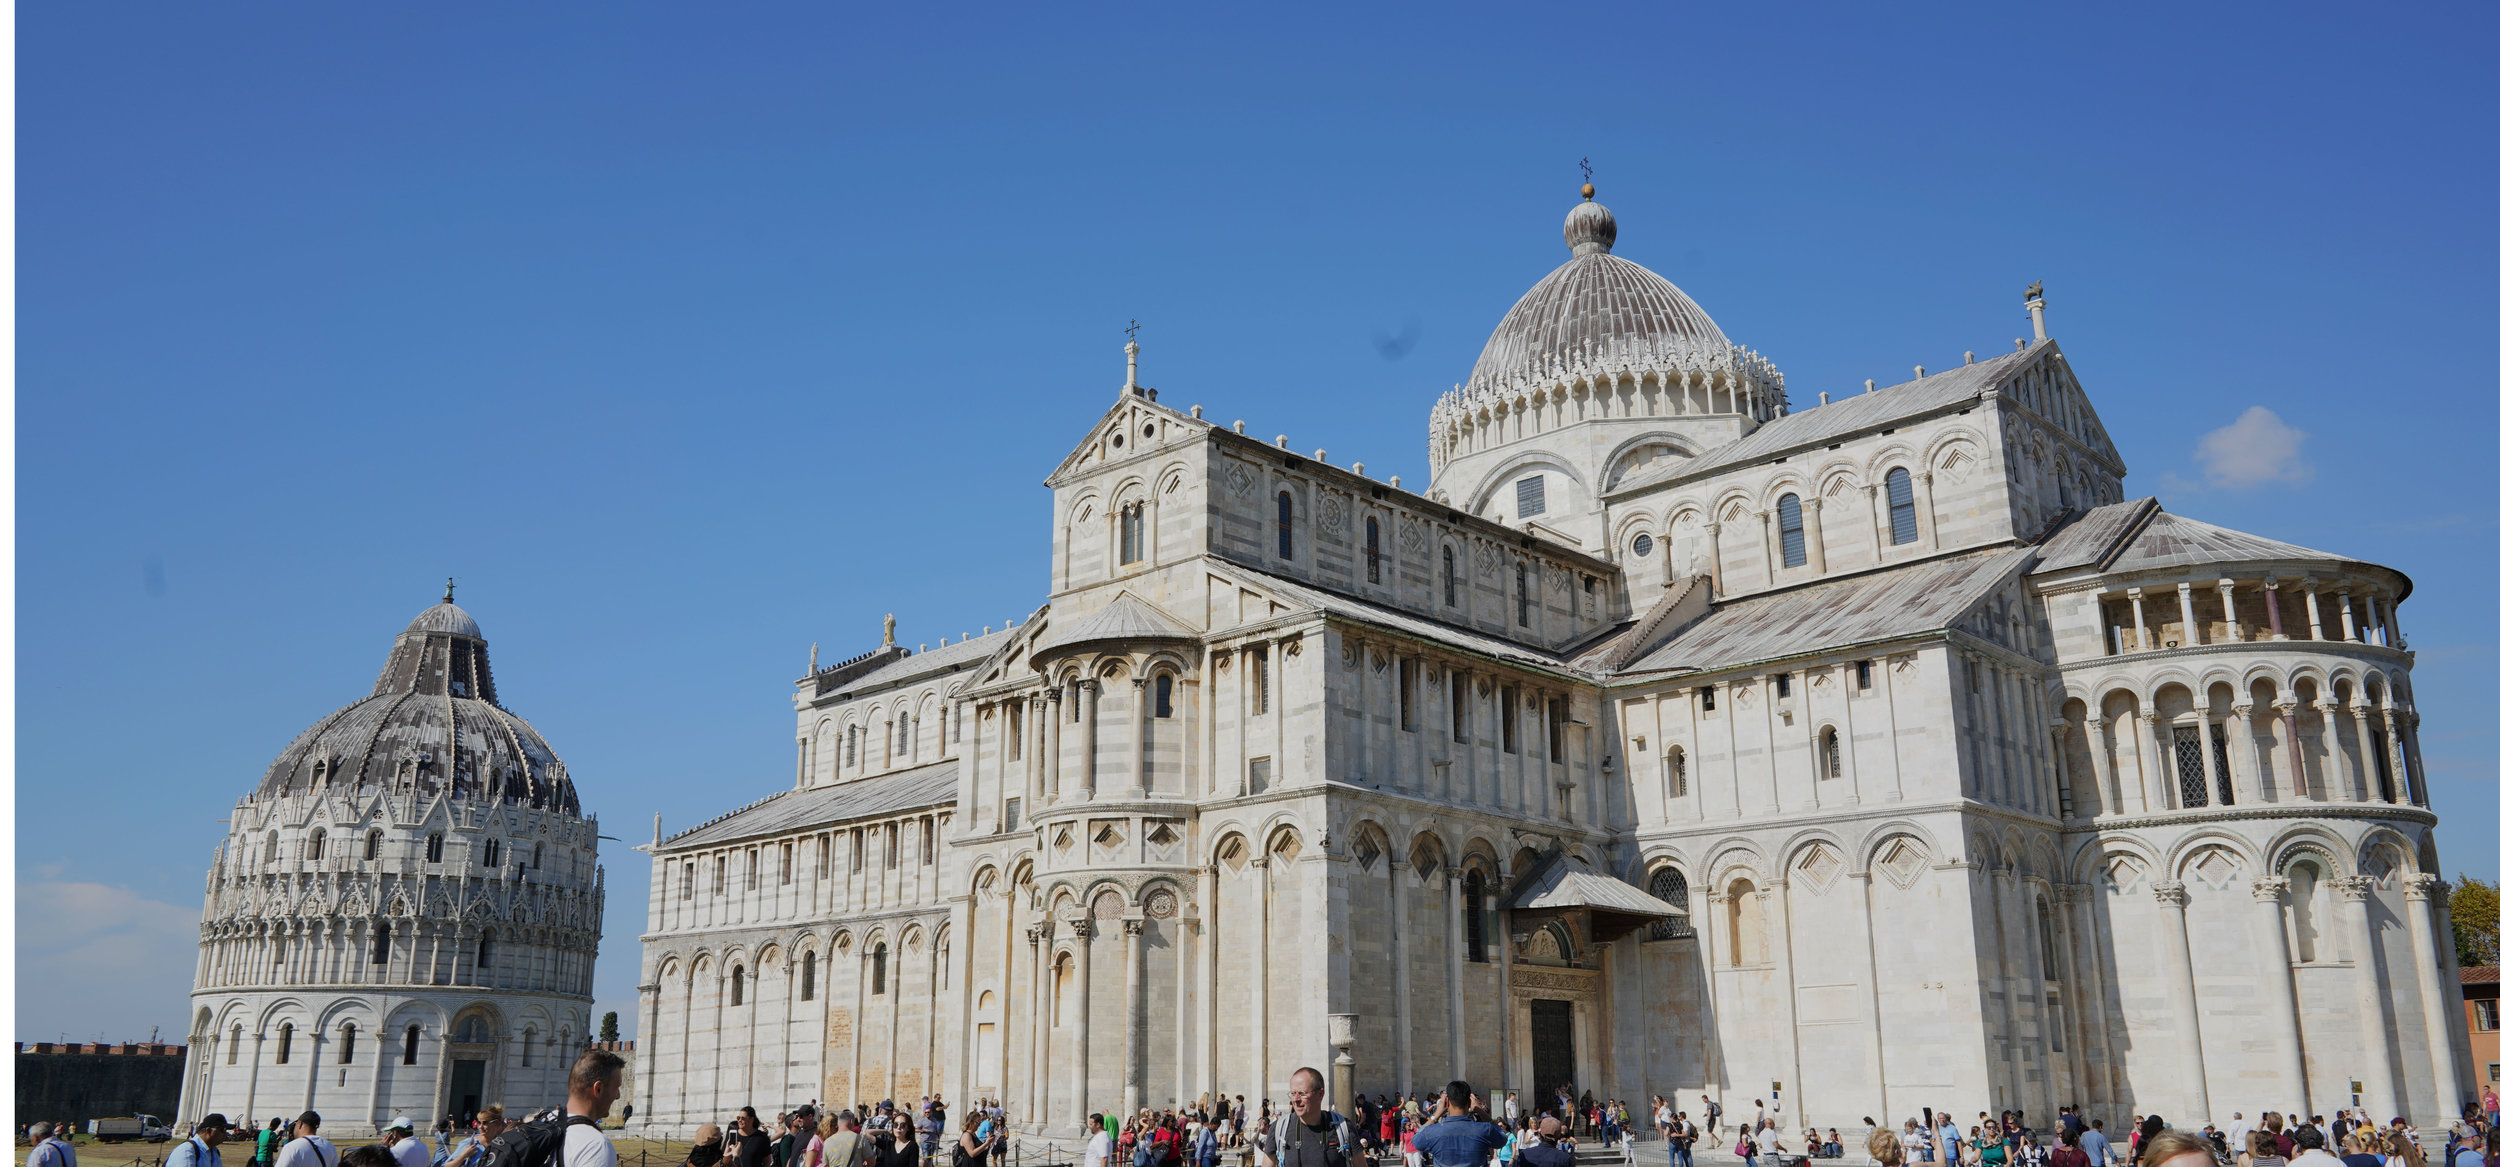 The Duomo and Baptistery.